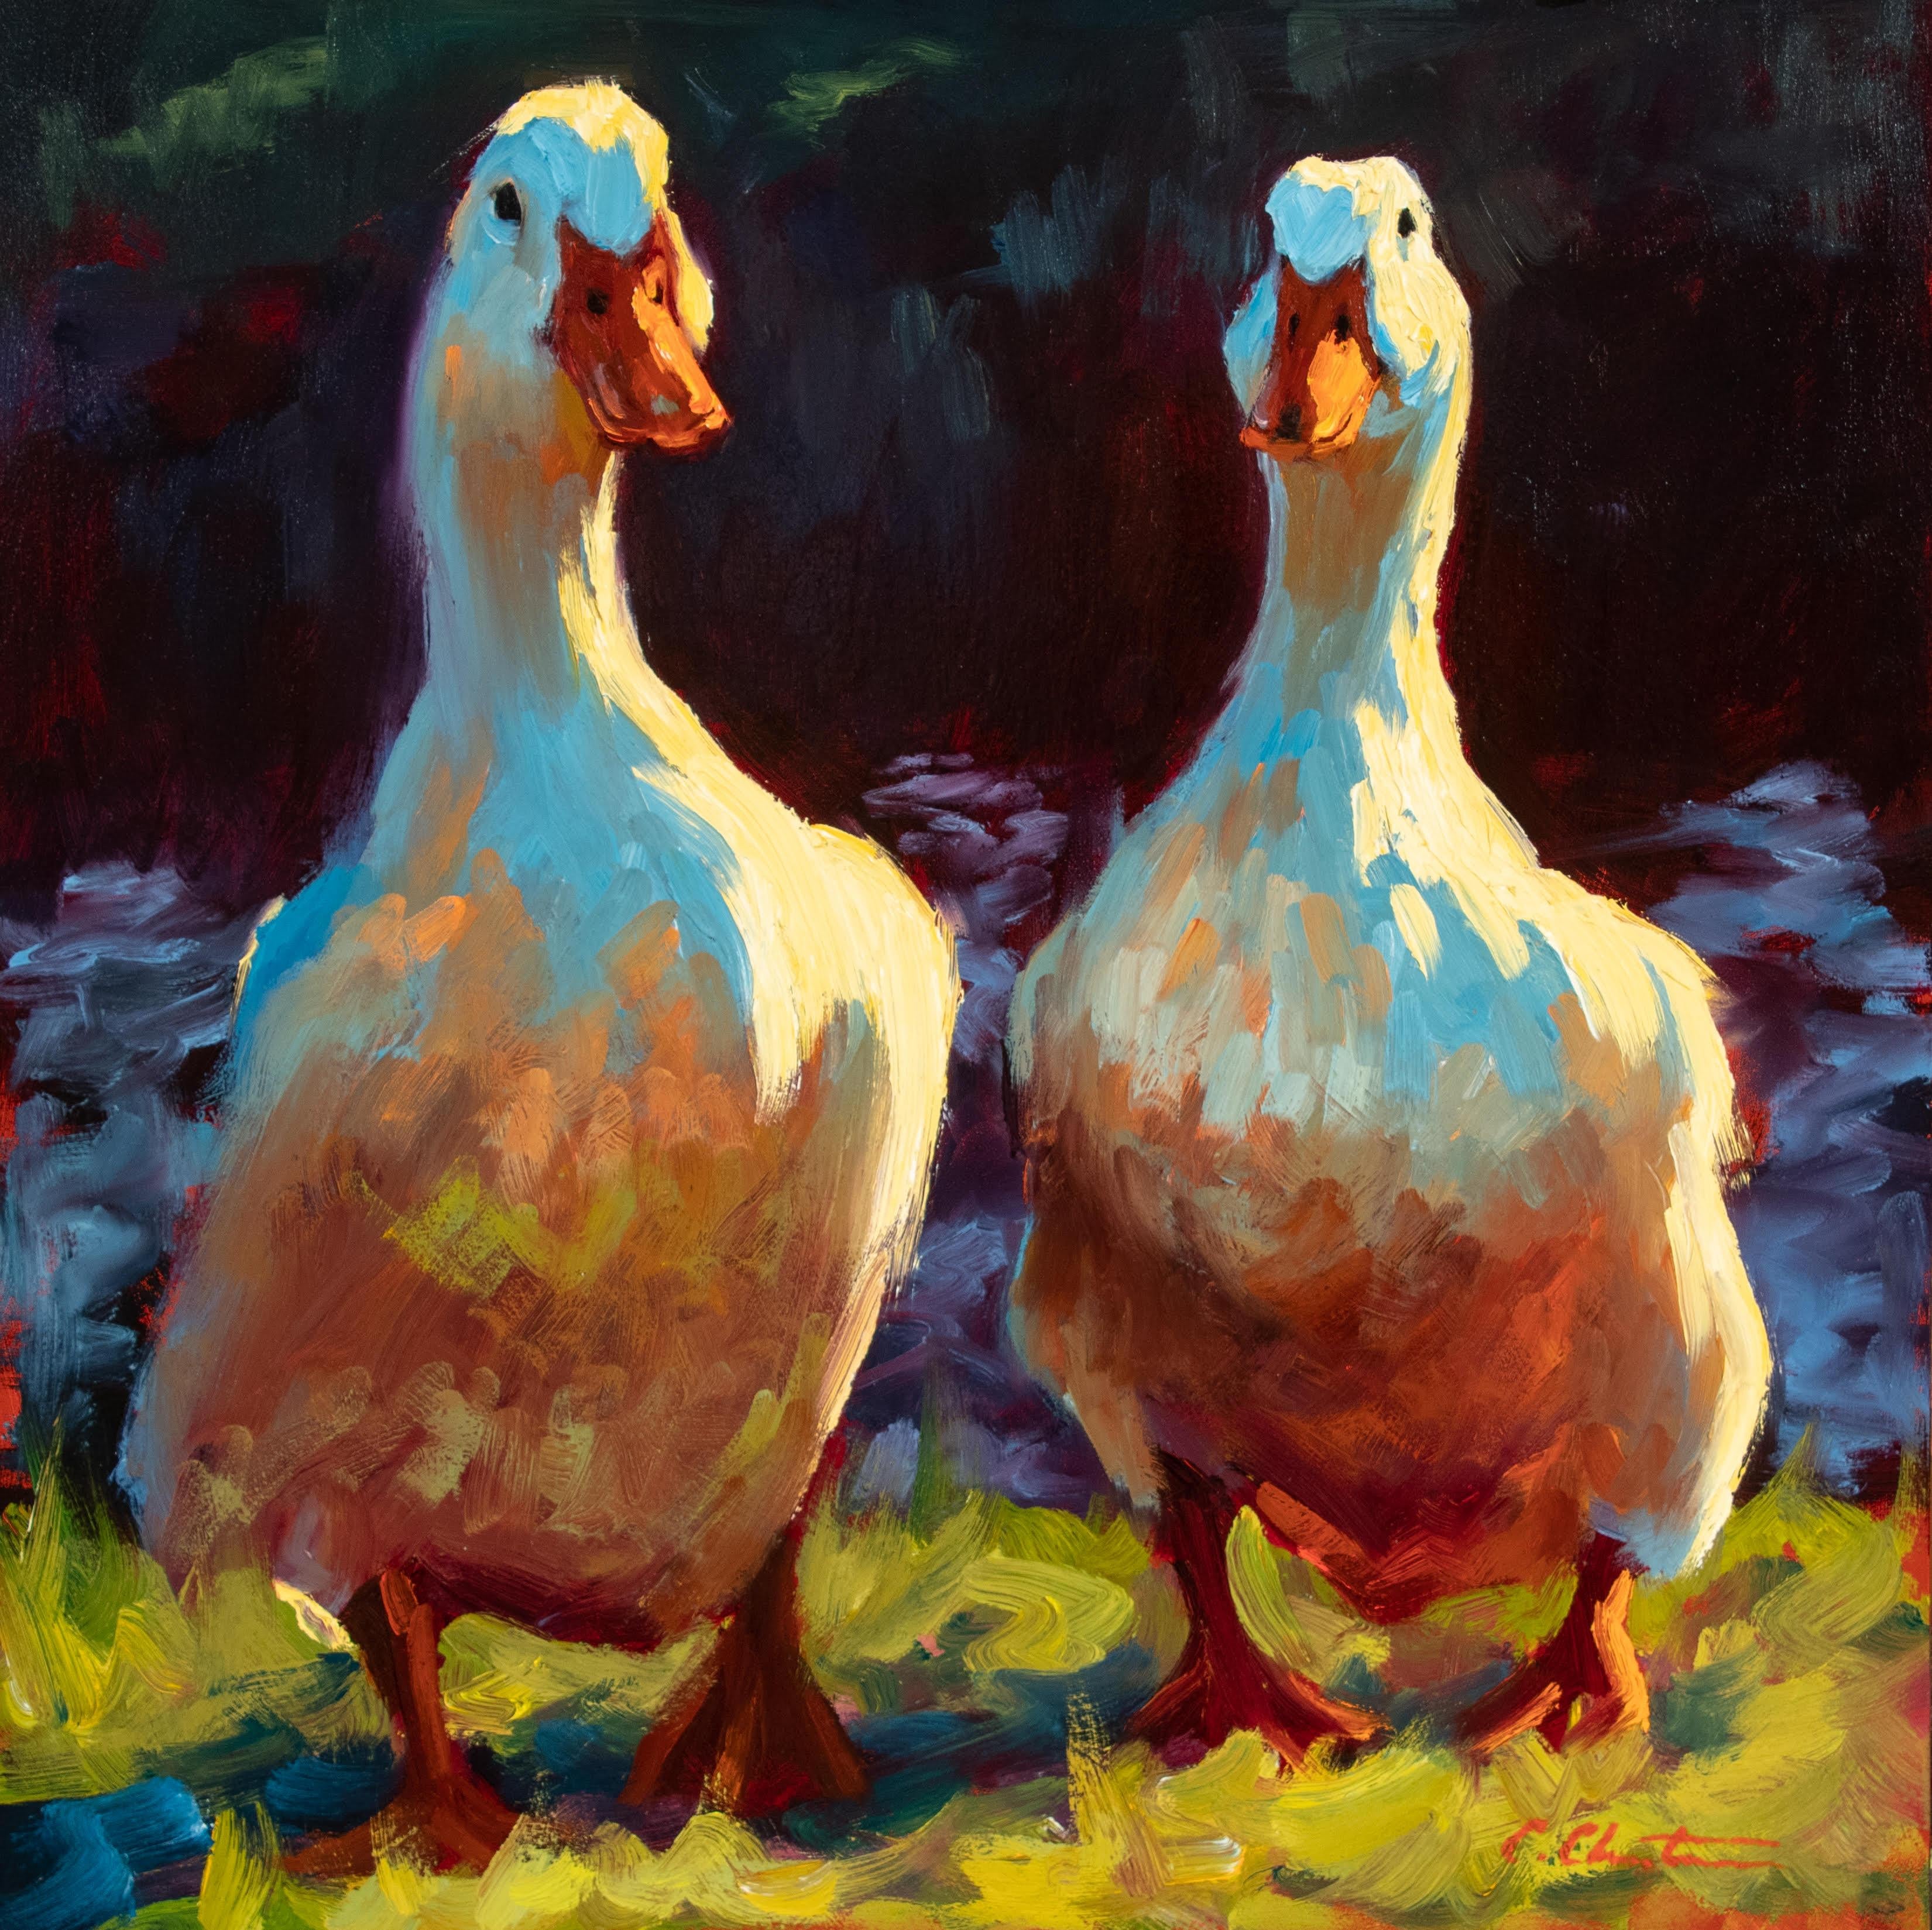 Cheri Christensen Animal Painting - "Quackers" impressionist style oil painting of two ducks in a field